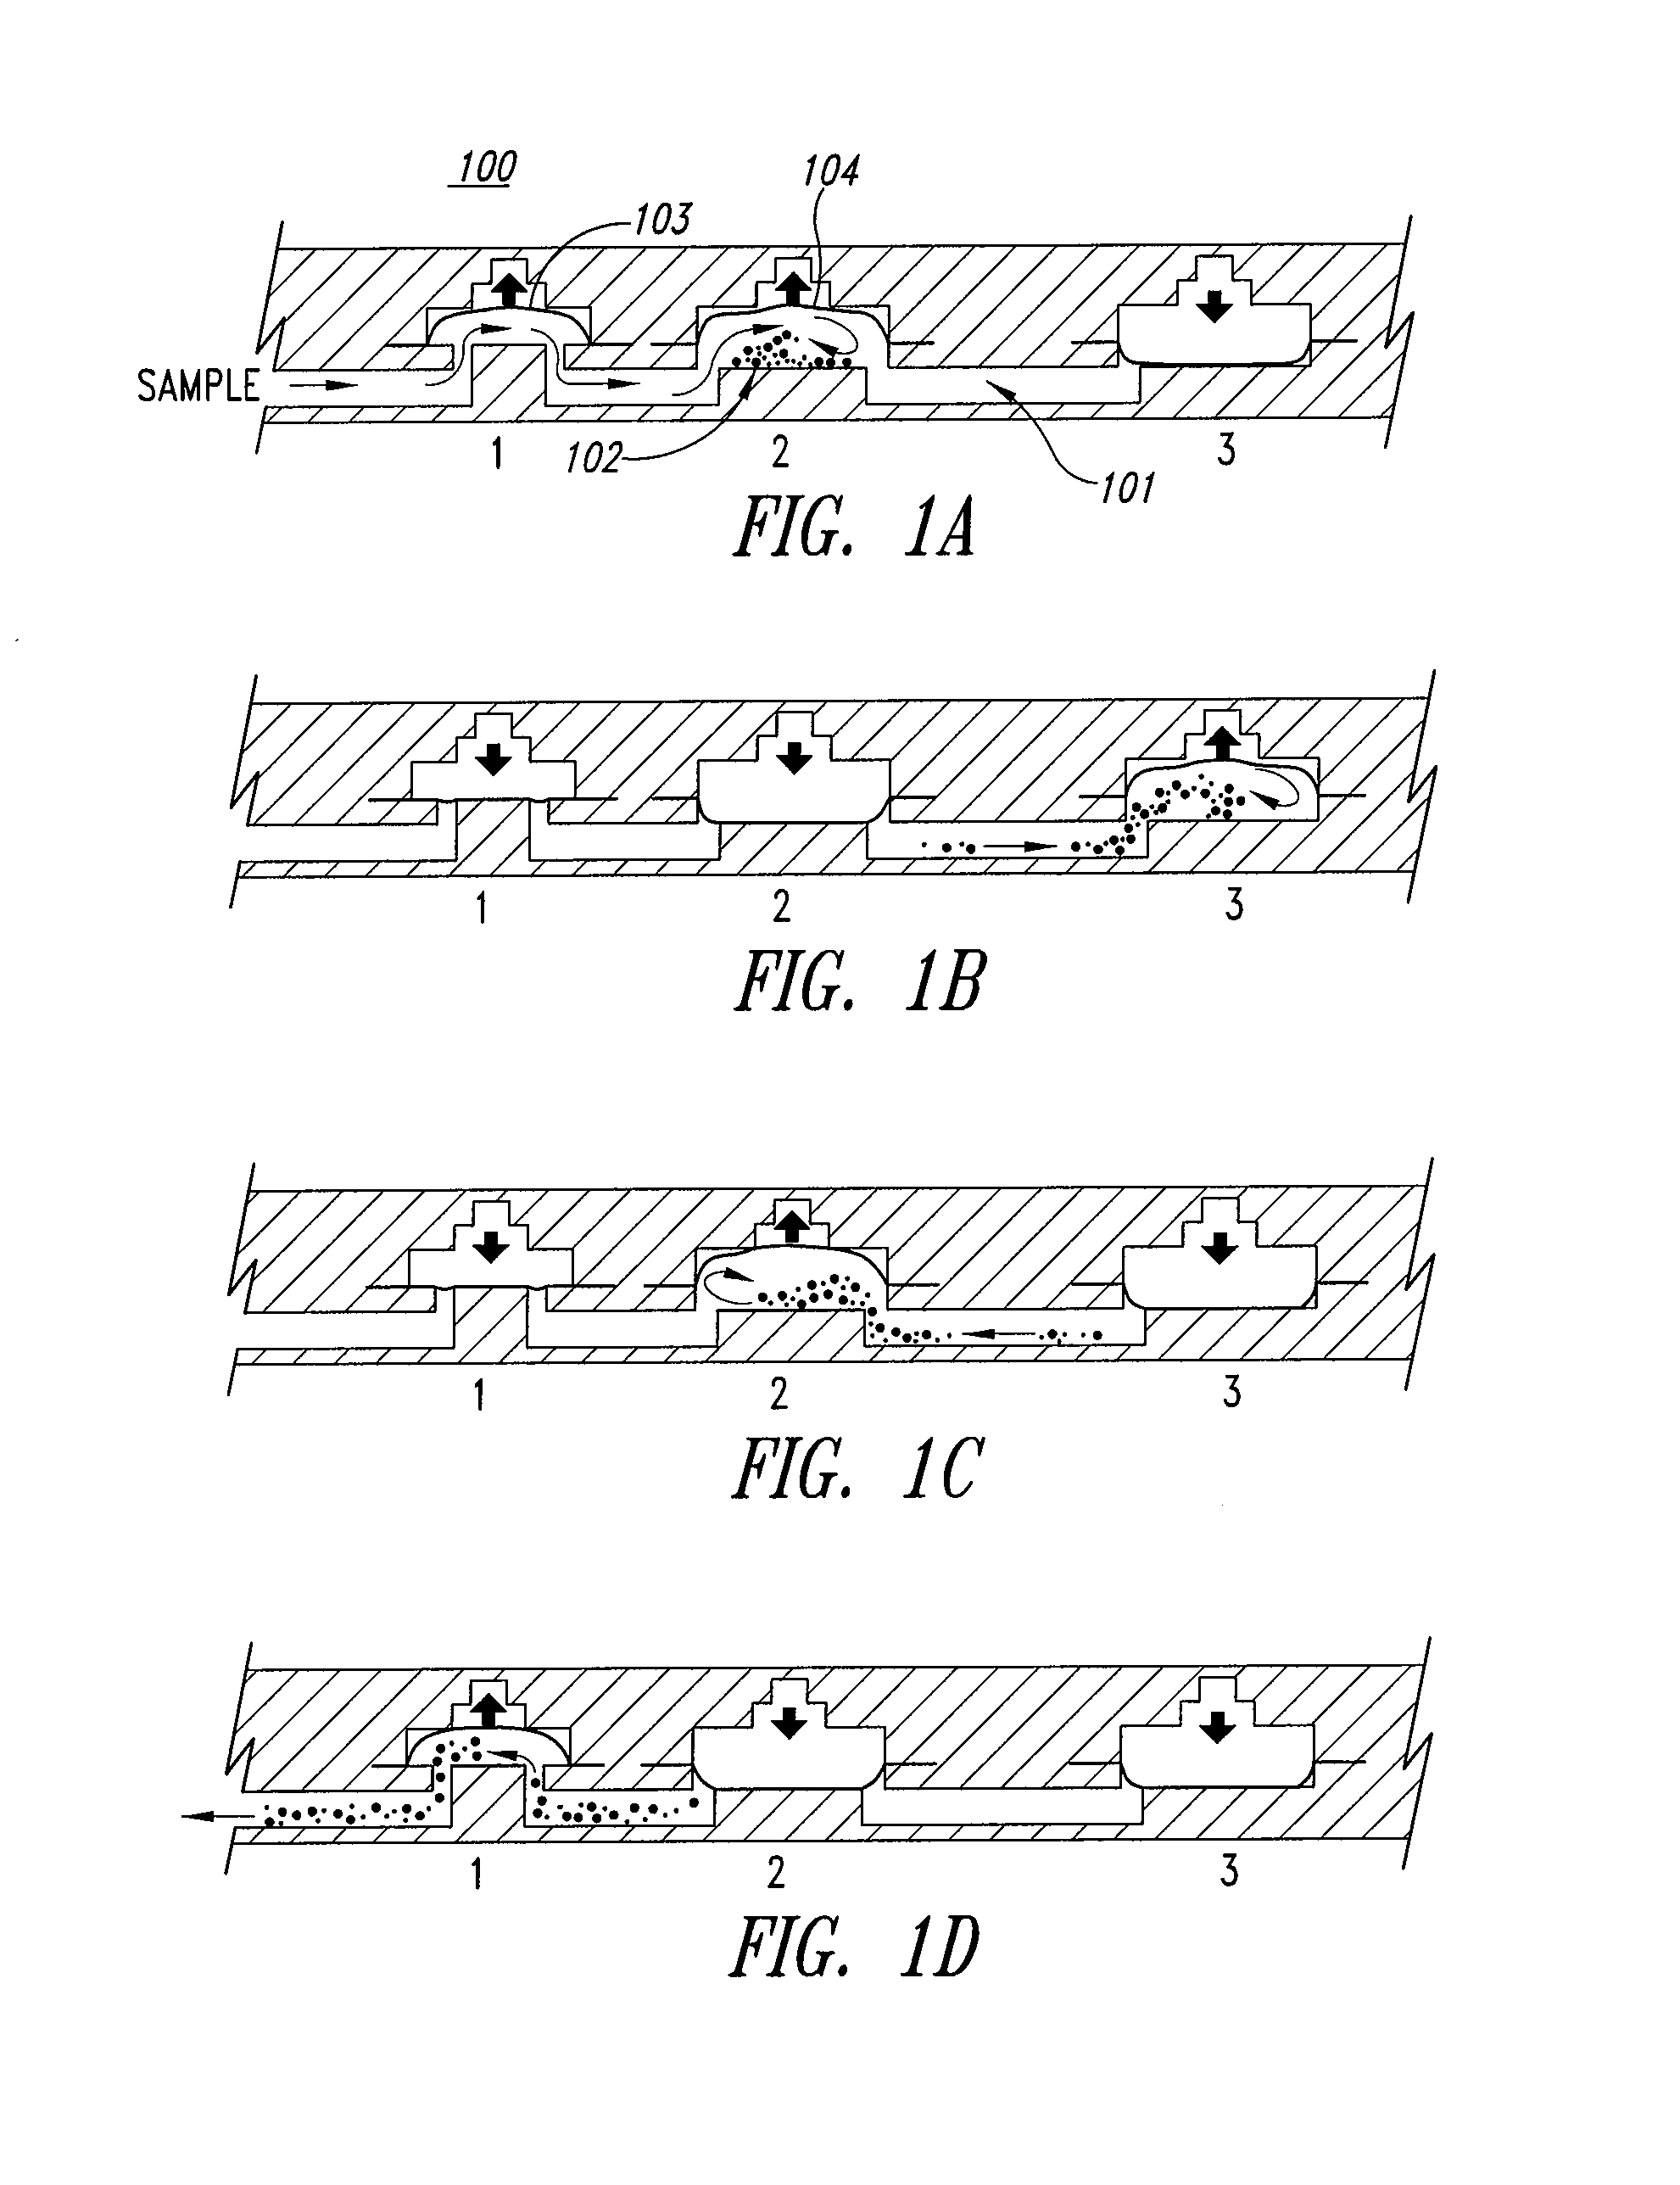 Microfluidic mixing and analytical apparatus